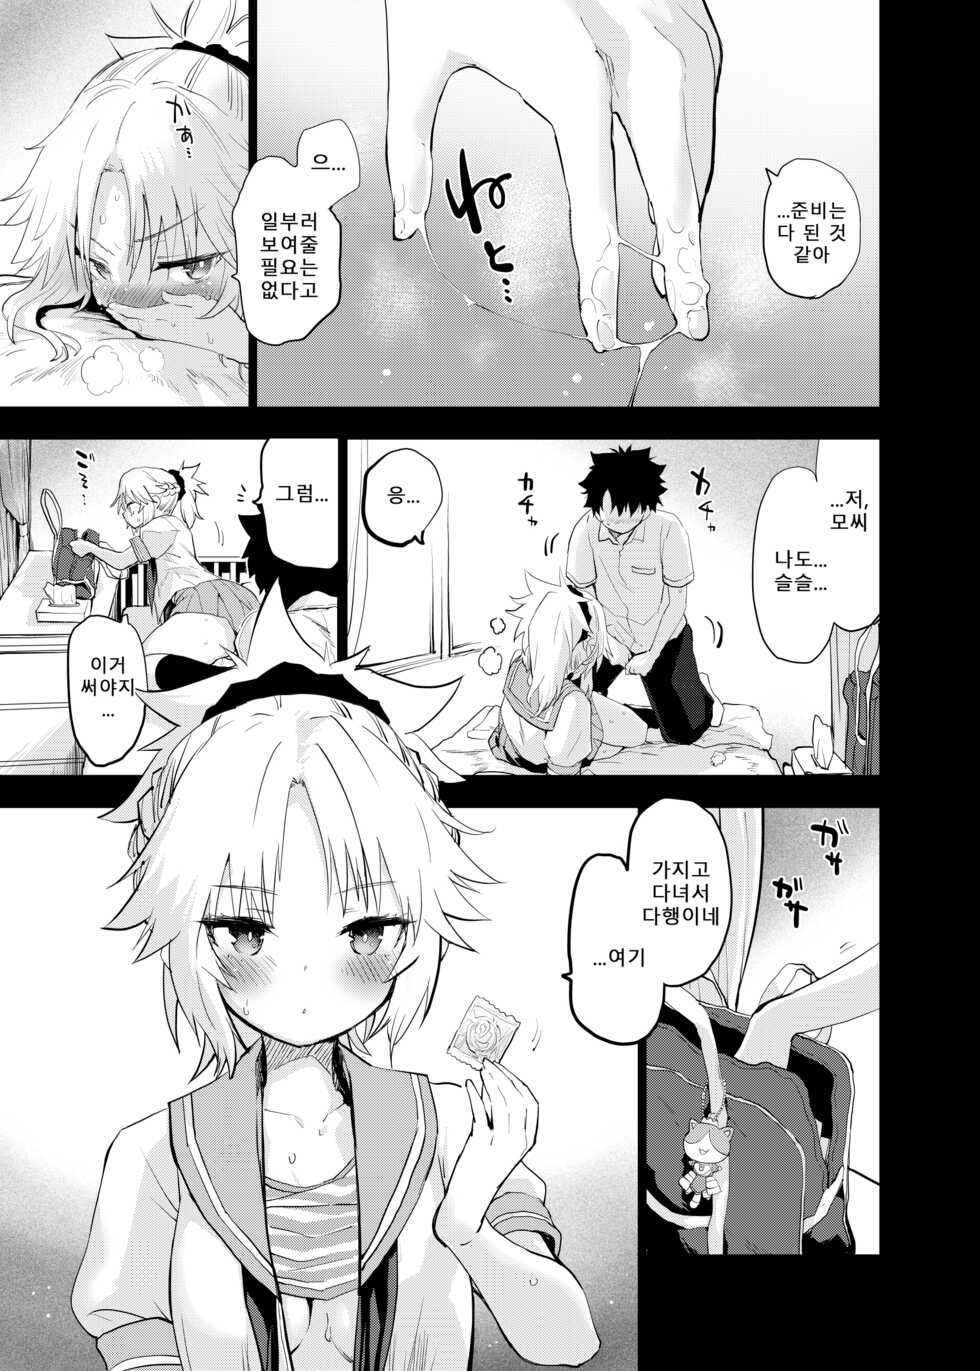 [Peθ (Mozu)] ApocryFucking' School Life Collabo Event <ROUTE: MORDRED> | ApocryFucking' 스쿨 라이프 콜라보 이벤트 <ROUTE: MORDRED> (Fate/Grand Order) [Korean] [Digital] - Page 9